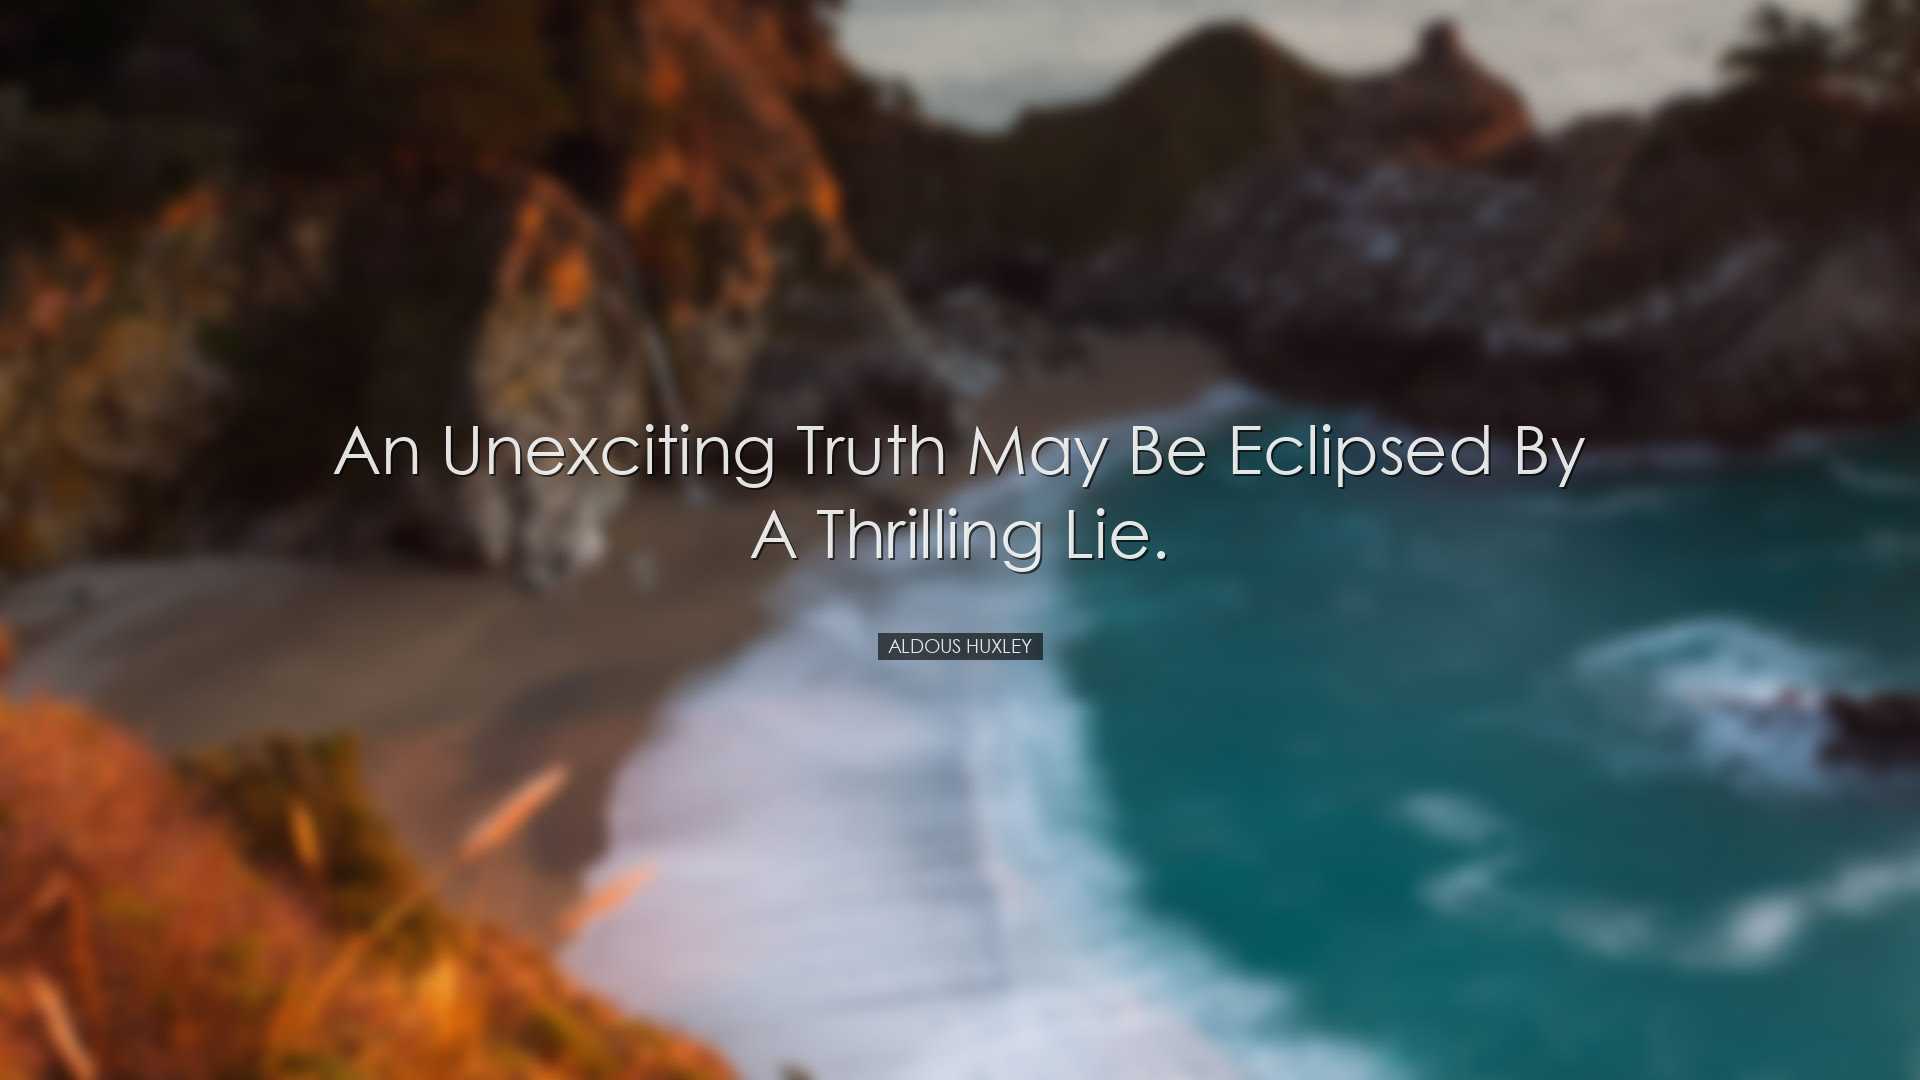 An unexciting truth may be eclipsed by a thrilling lie. - Aldous H